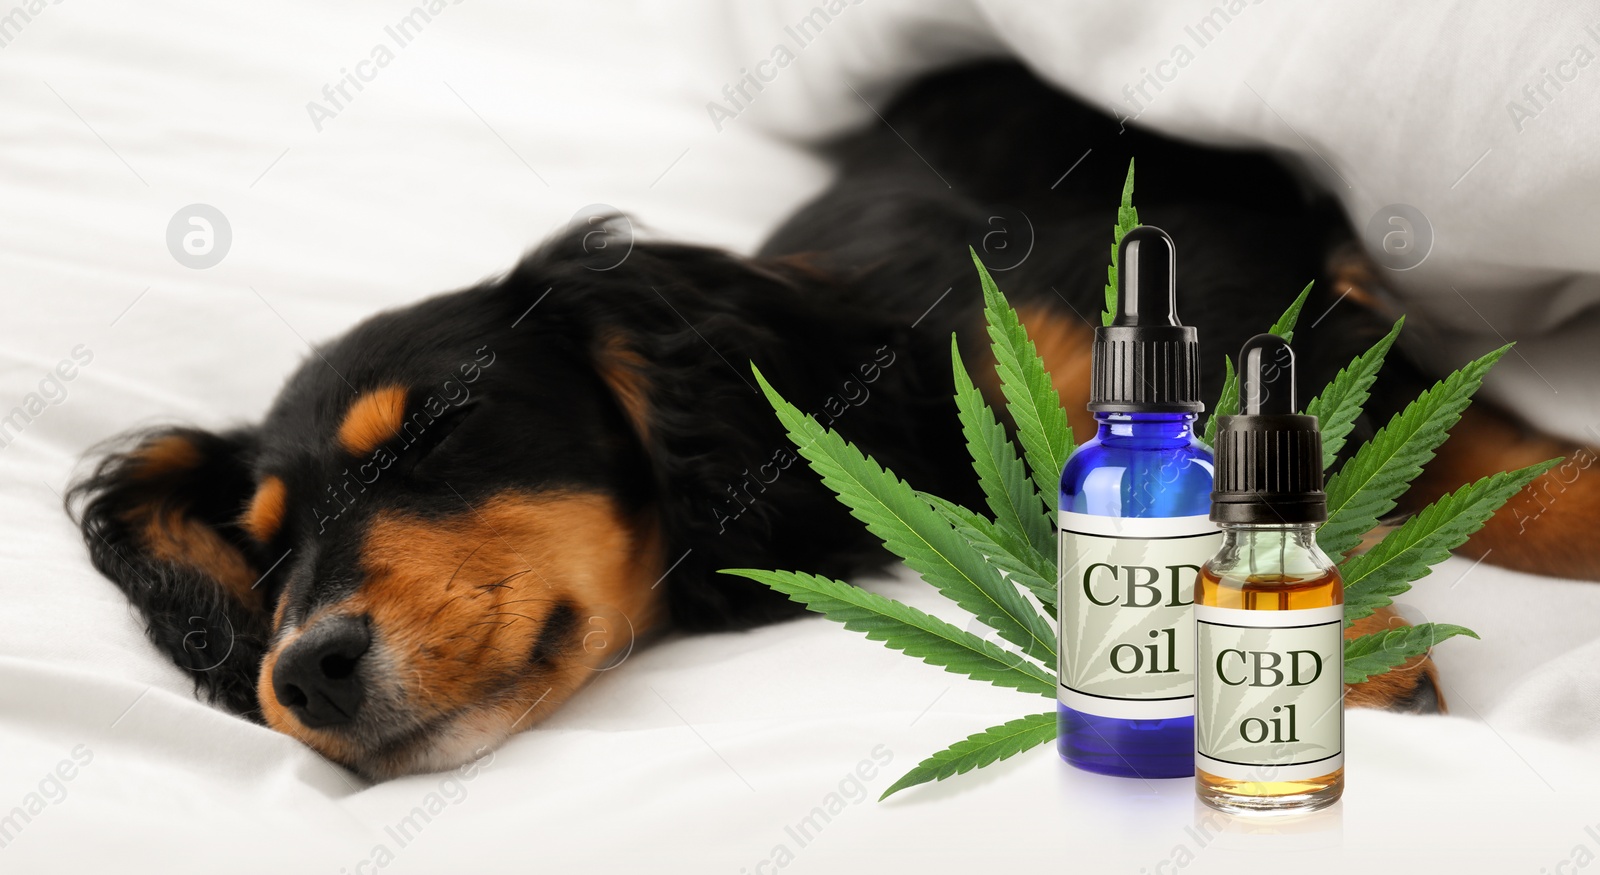 Image of Bottles of CBD oil and cute dog sleeping on white fabric